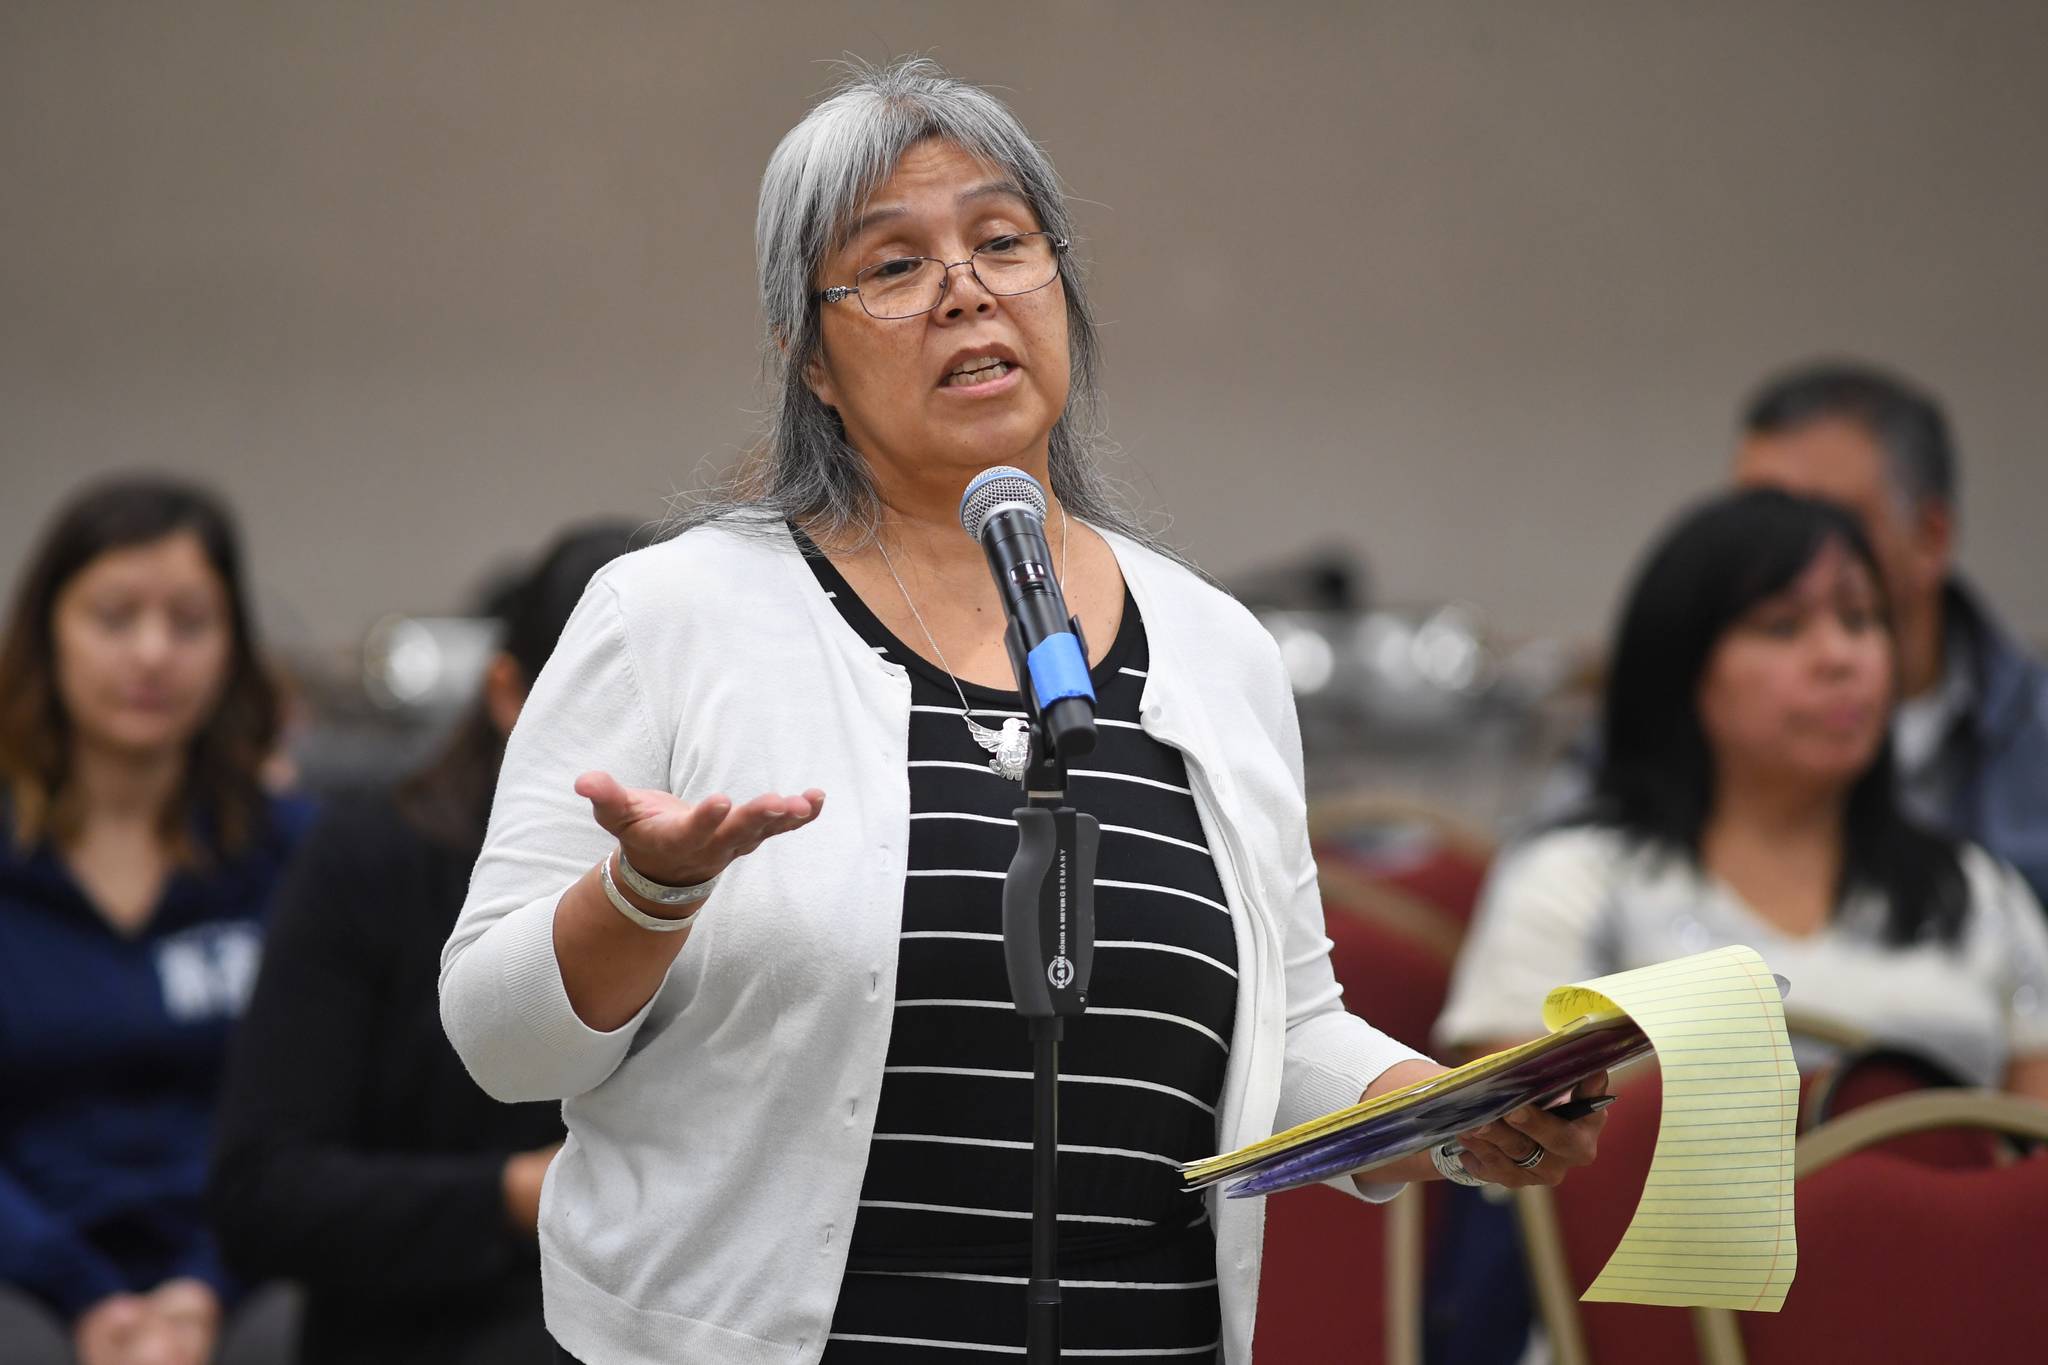 Mary Marks speak to members of the Central Council of Tlingit and Haida Indian Tribes of Alaska about funding cuts to the Headstart program during an Executive Council meeting at the Elizabeth Peratrovich Hall on Thursday, July 18, 2019. (Michael Penn | Juneau Empire)